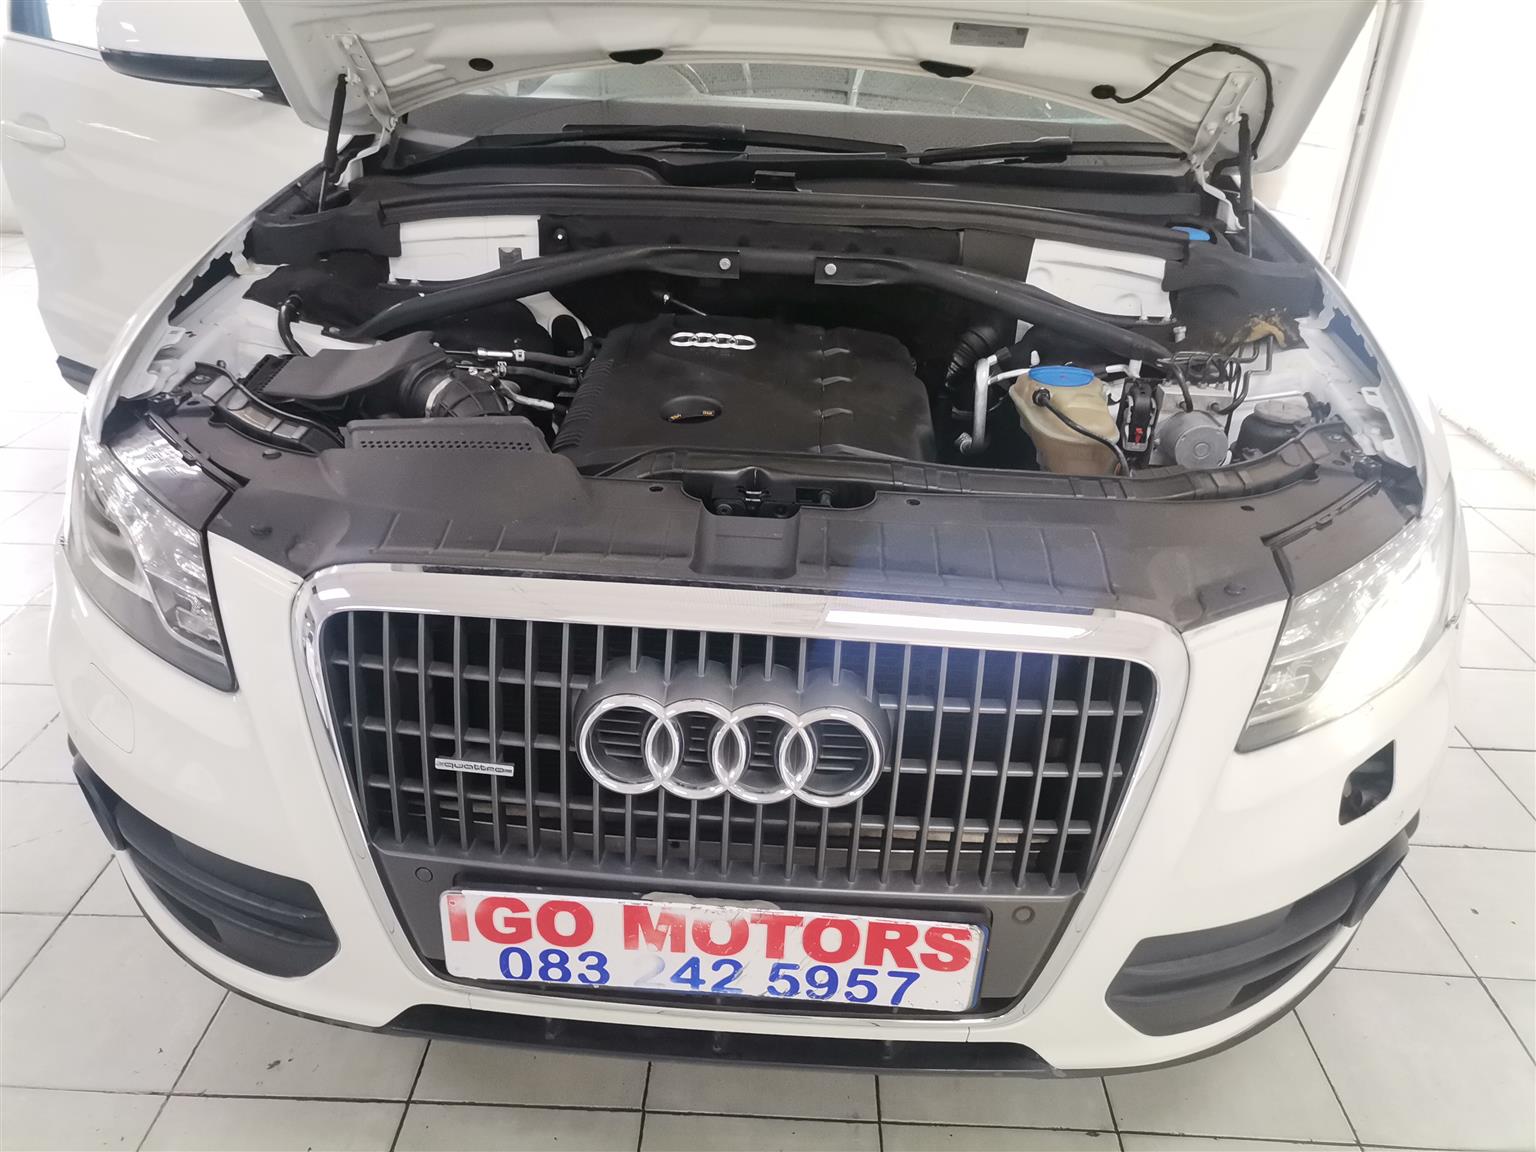 2011 Audi Q5 2.0TFSi Auto 105000km R130000 Mechanicaly perfect with Leather Seat